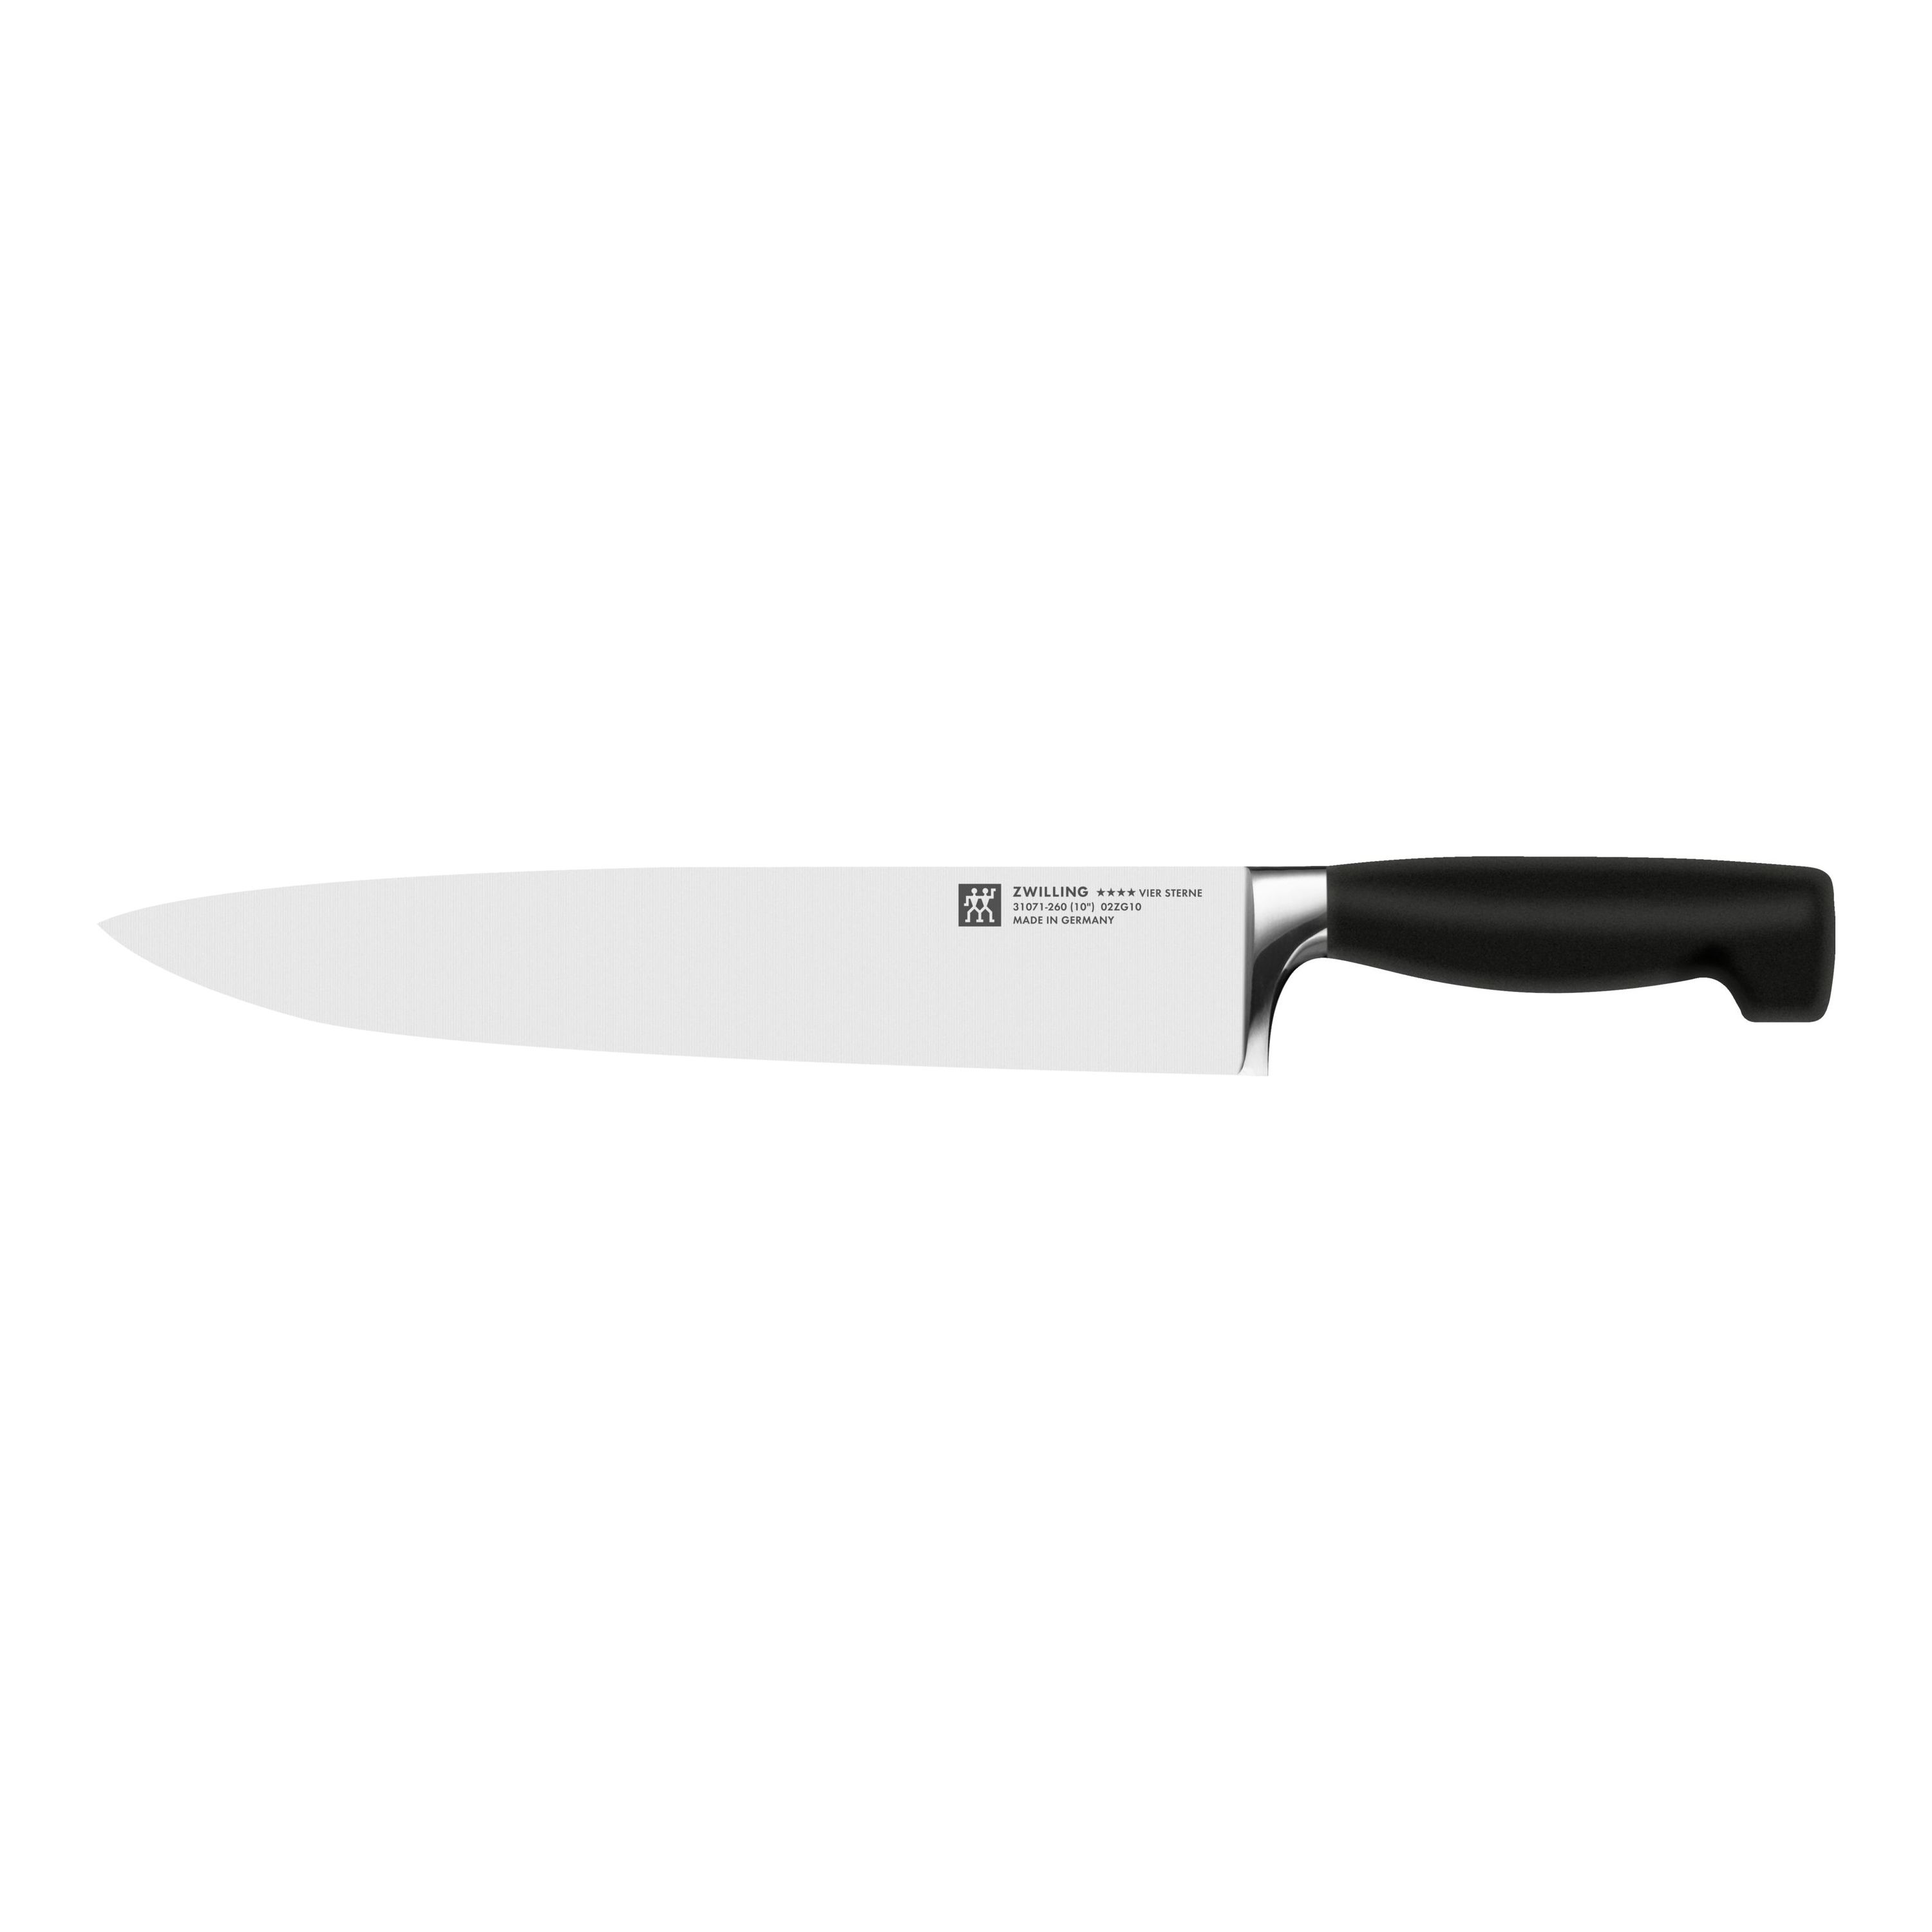 10-inch, Chef's knife